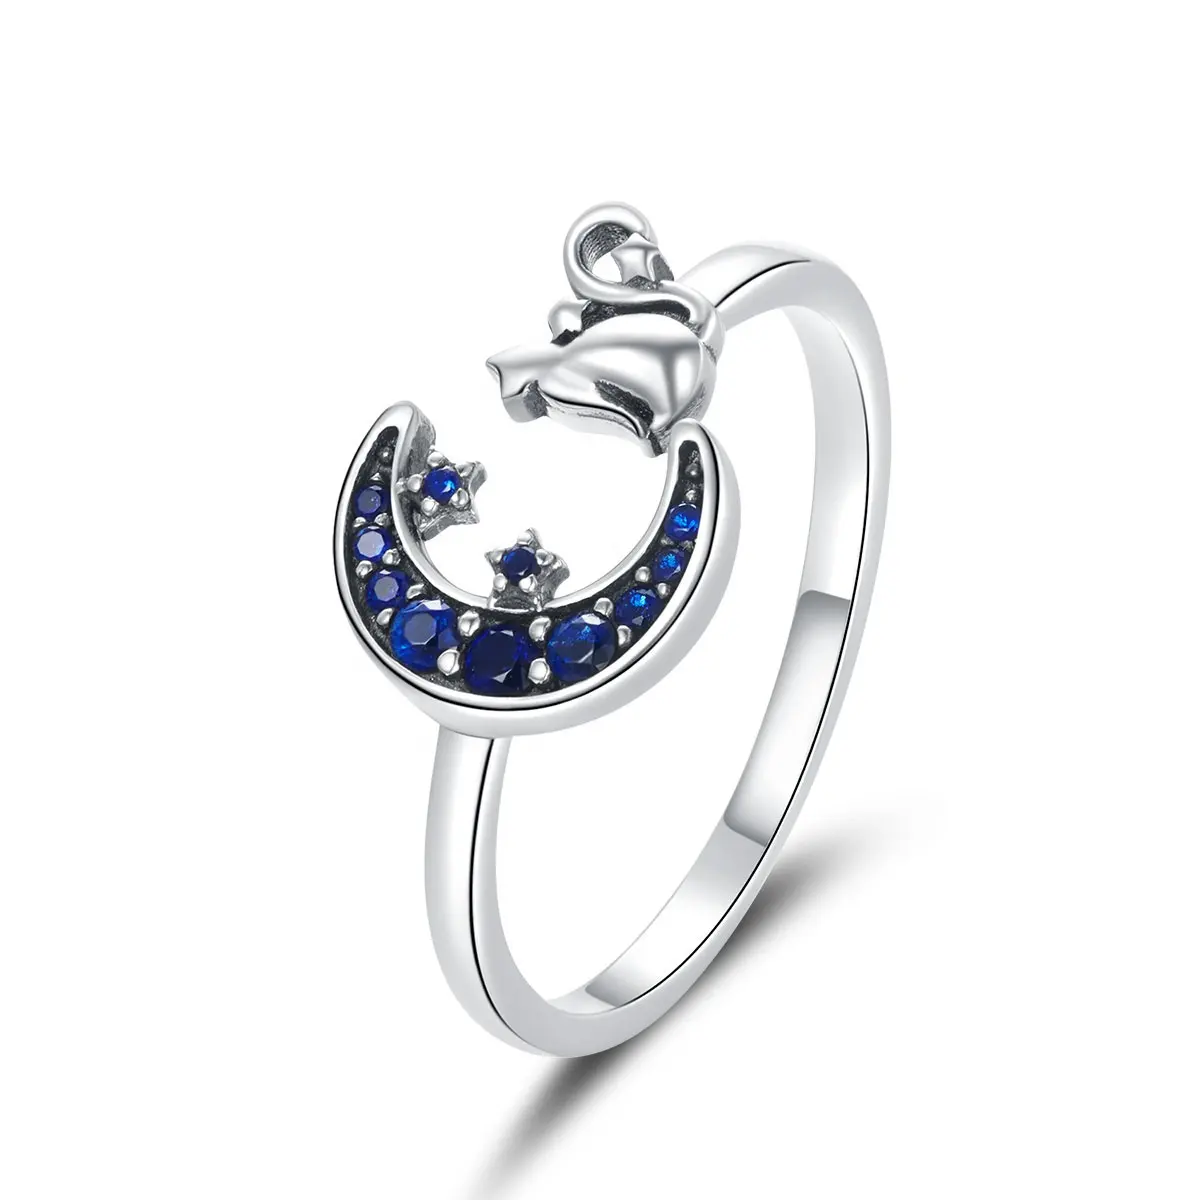 New moon cat S925 sterling silver ring blue crescent opening adjustment wedding rings for women